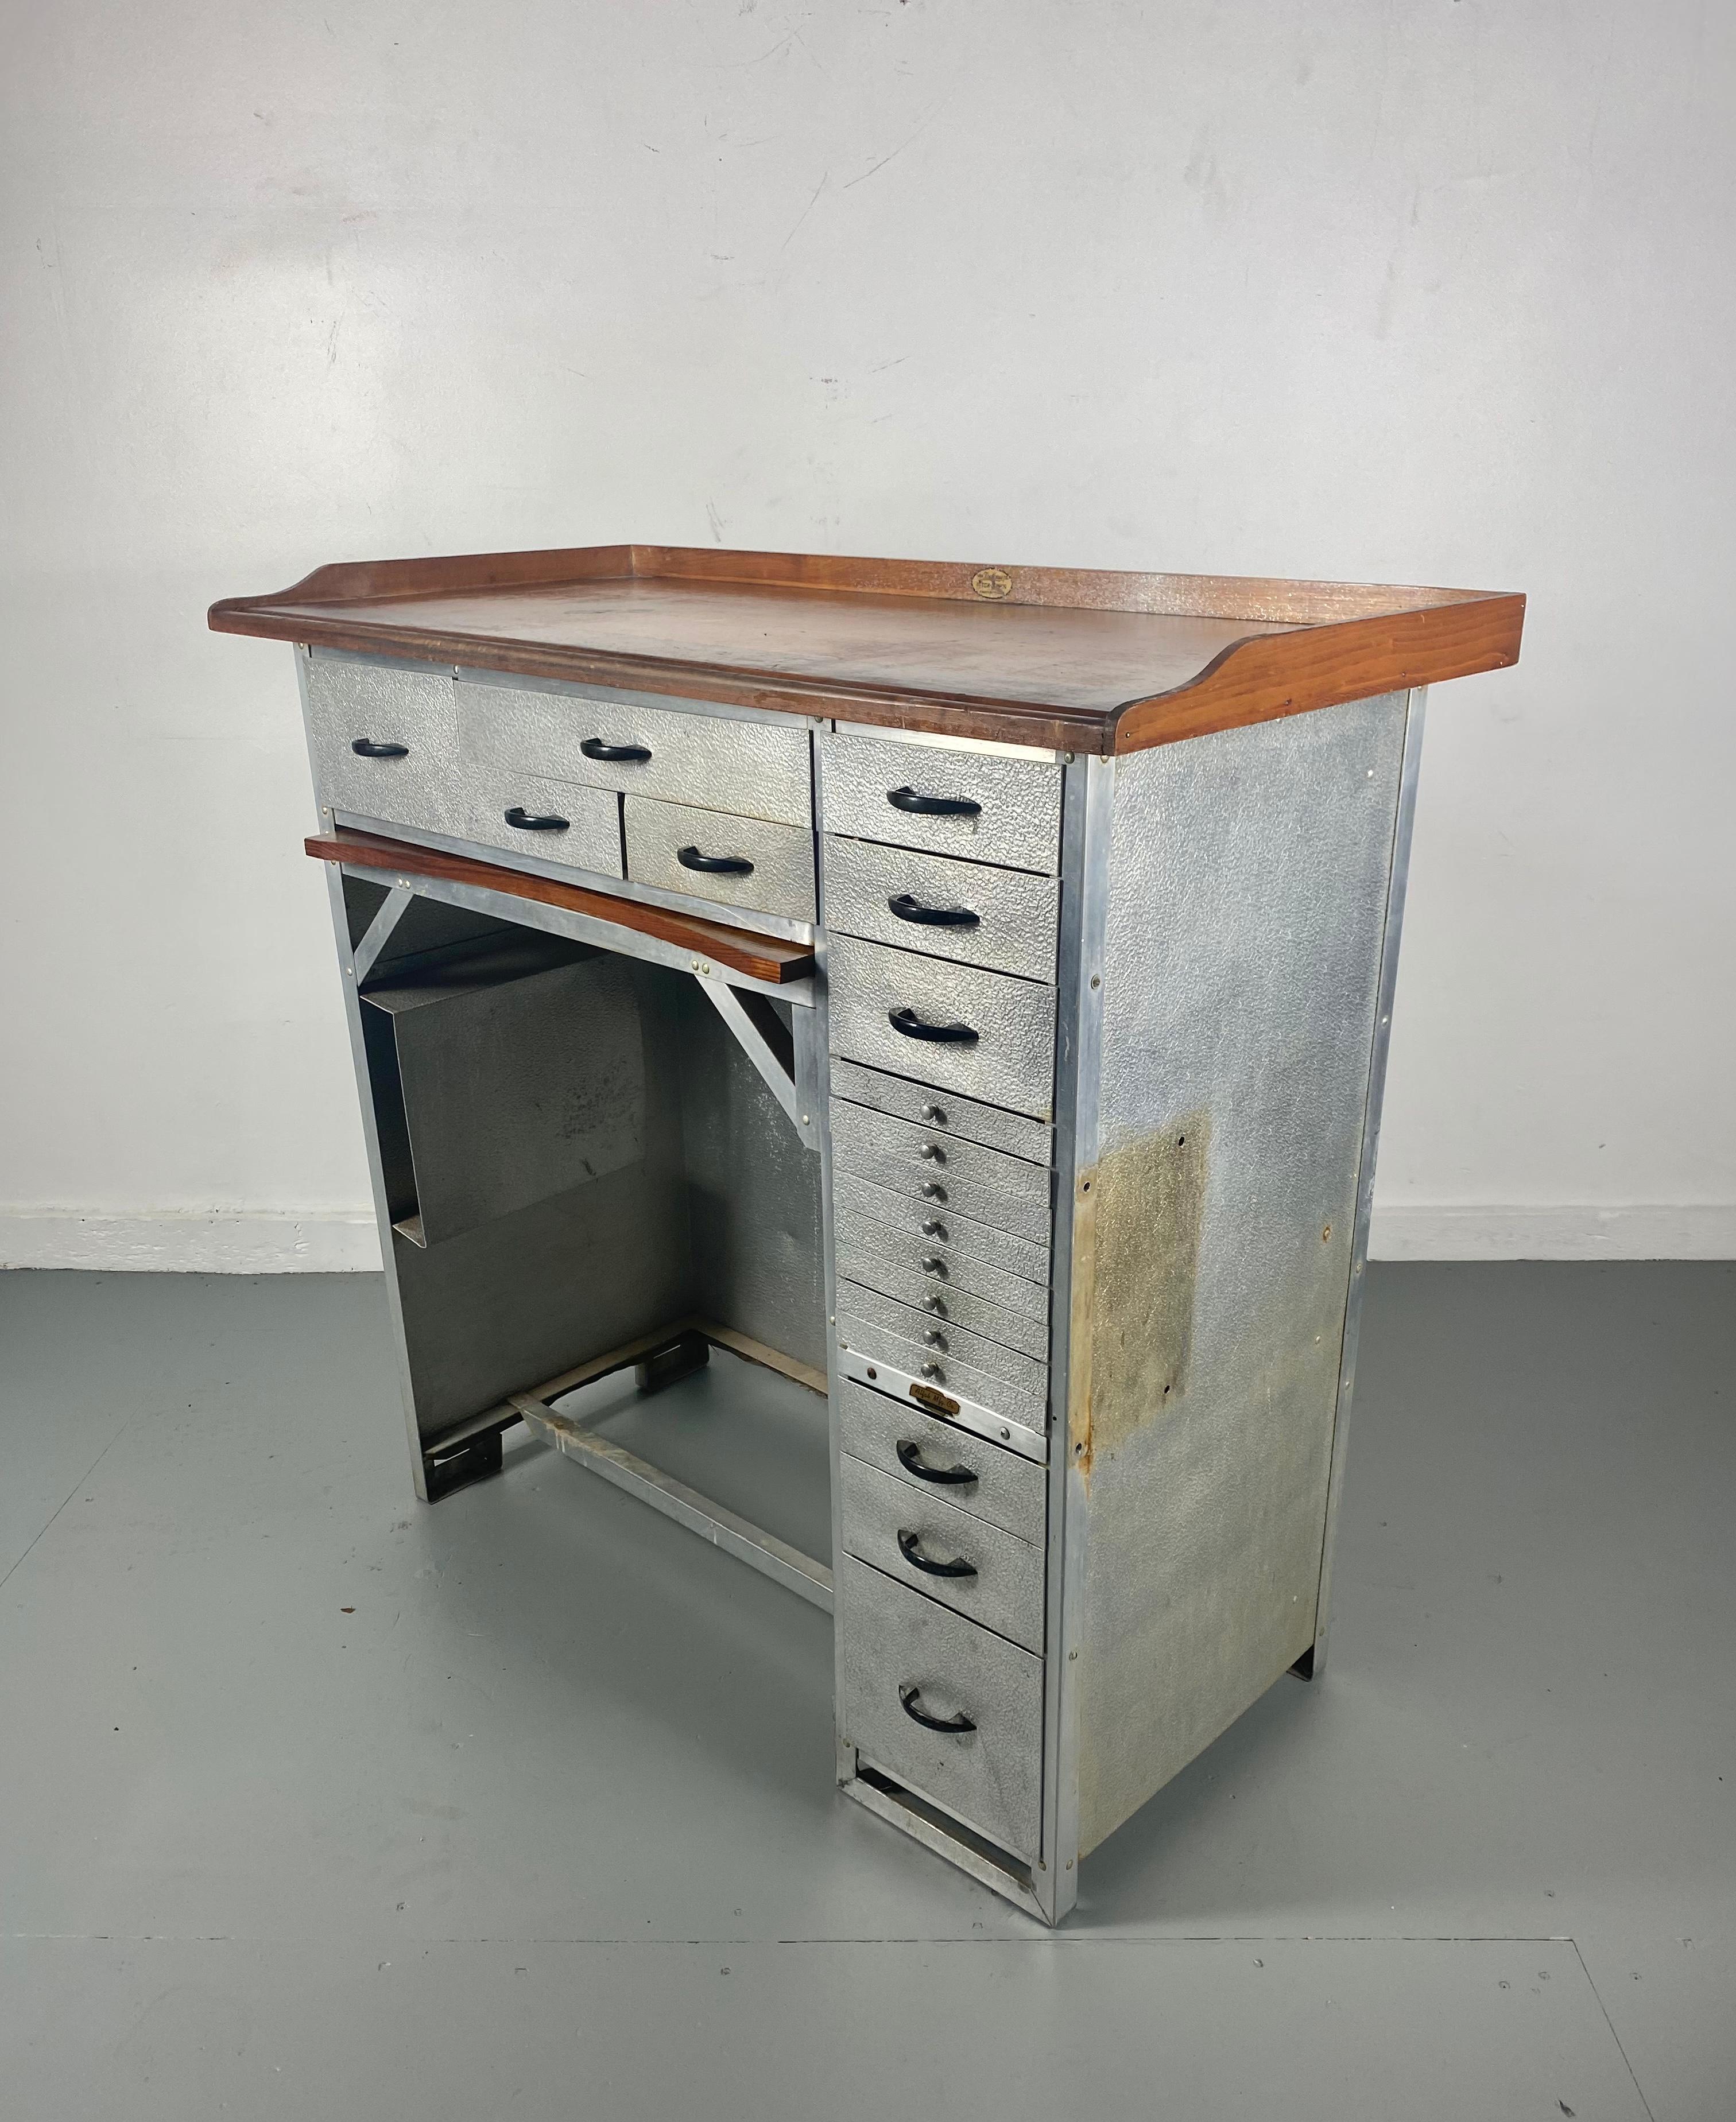 Impressive aluminum desk with numerous drawers used originally for watch making. made by ALFAB.. (aluminum fabricating),, Finished wood top, hammered aluminum, original bakelite handles.Pull out catch tray,, Makes a great kitchen prep table as well